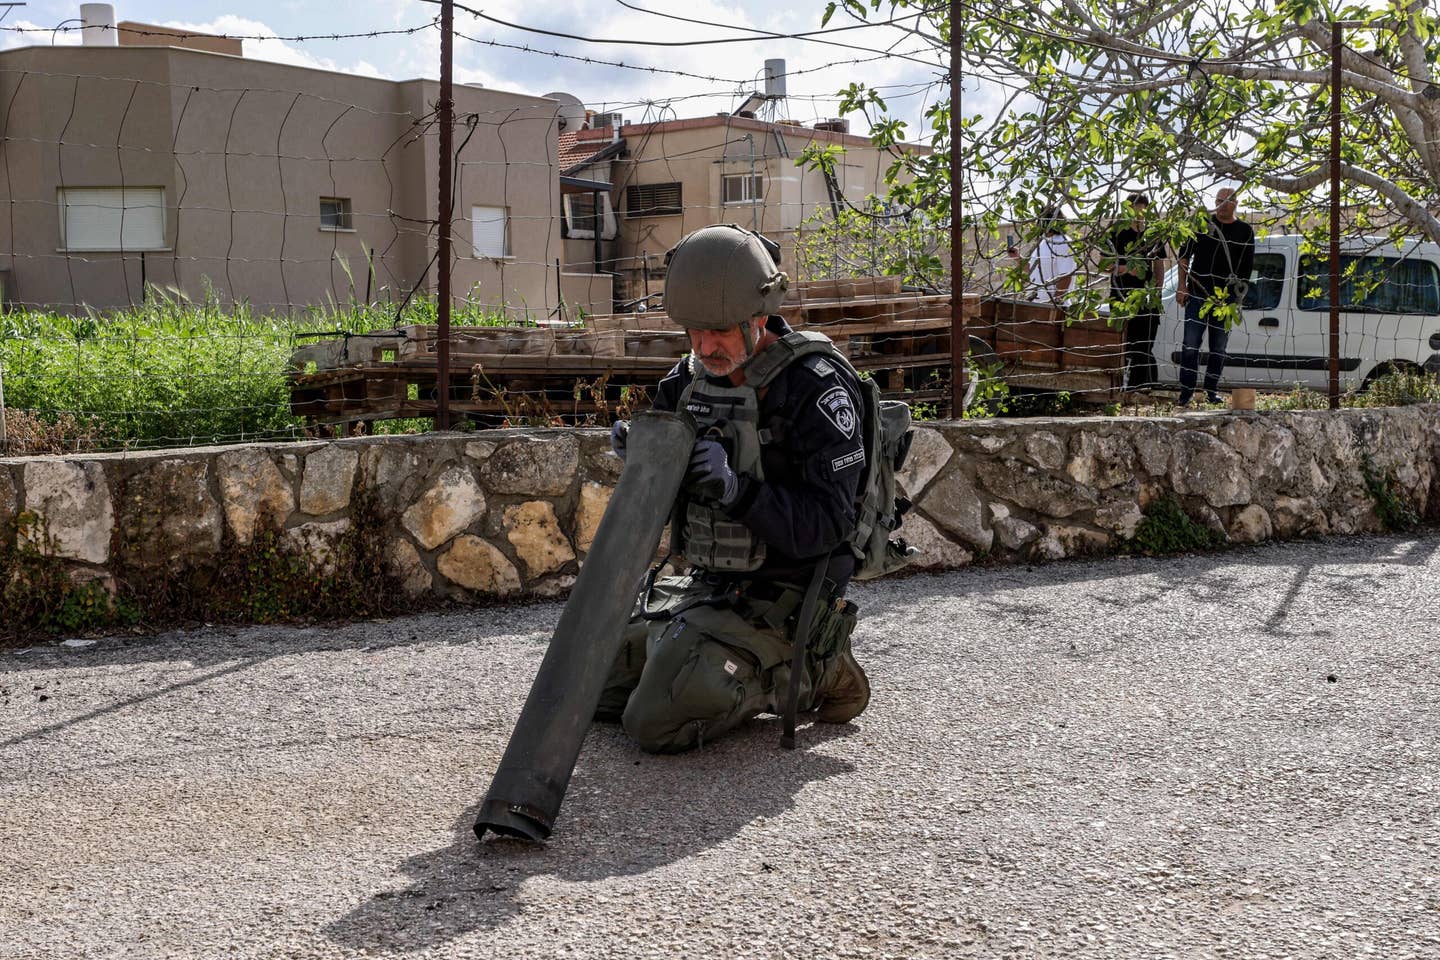 An Israeli police bomb disposal unit member inspects the remains of a rocket fired from Lebanon into the northern Israeli town of Fassuta on April 6, 2023. <em>Photo by JALAA MAREY/AFP via Getty Images</em>